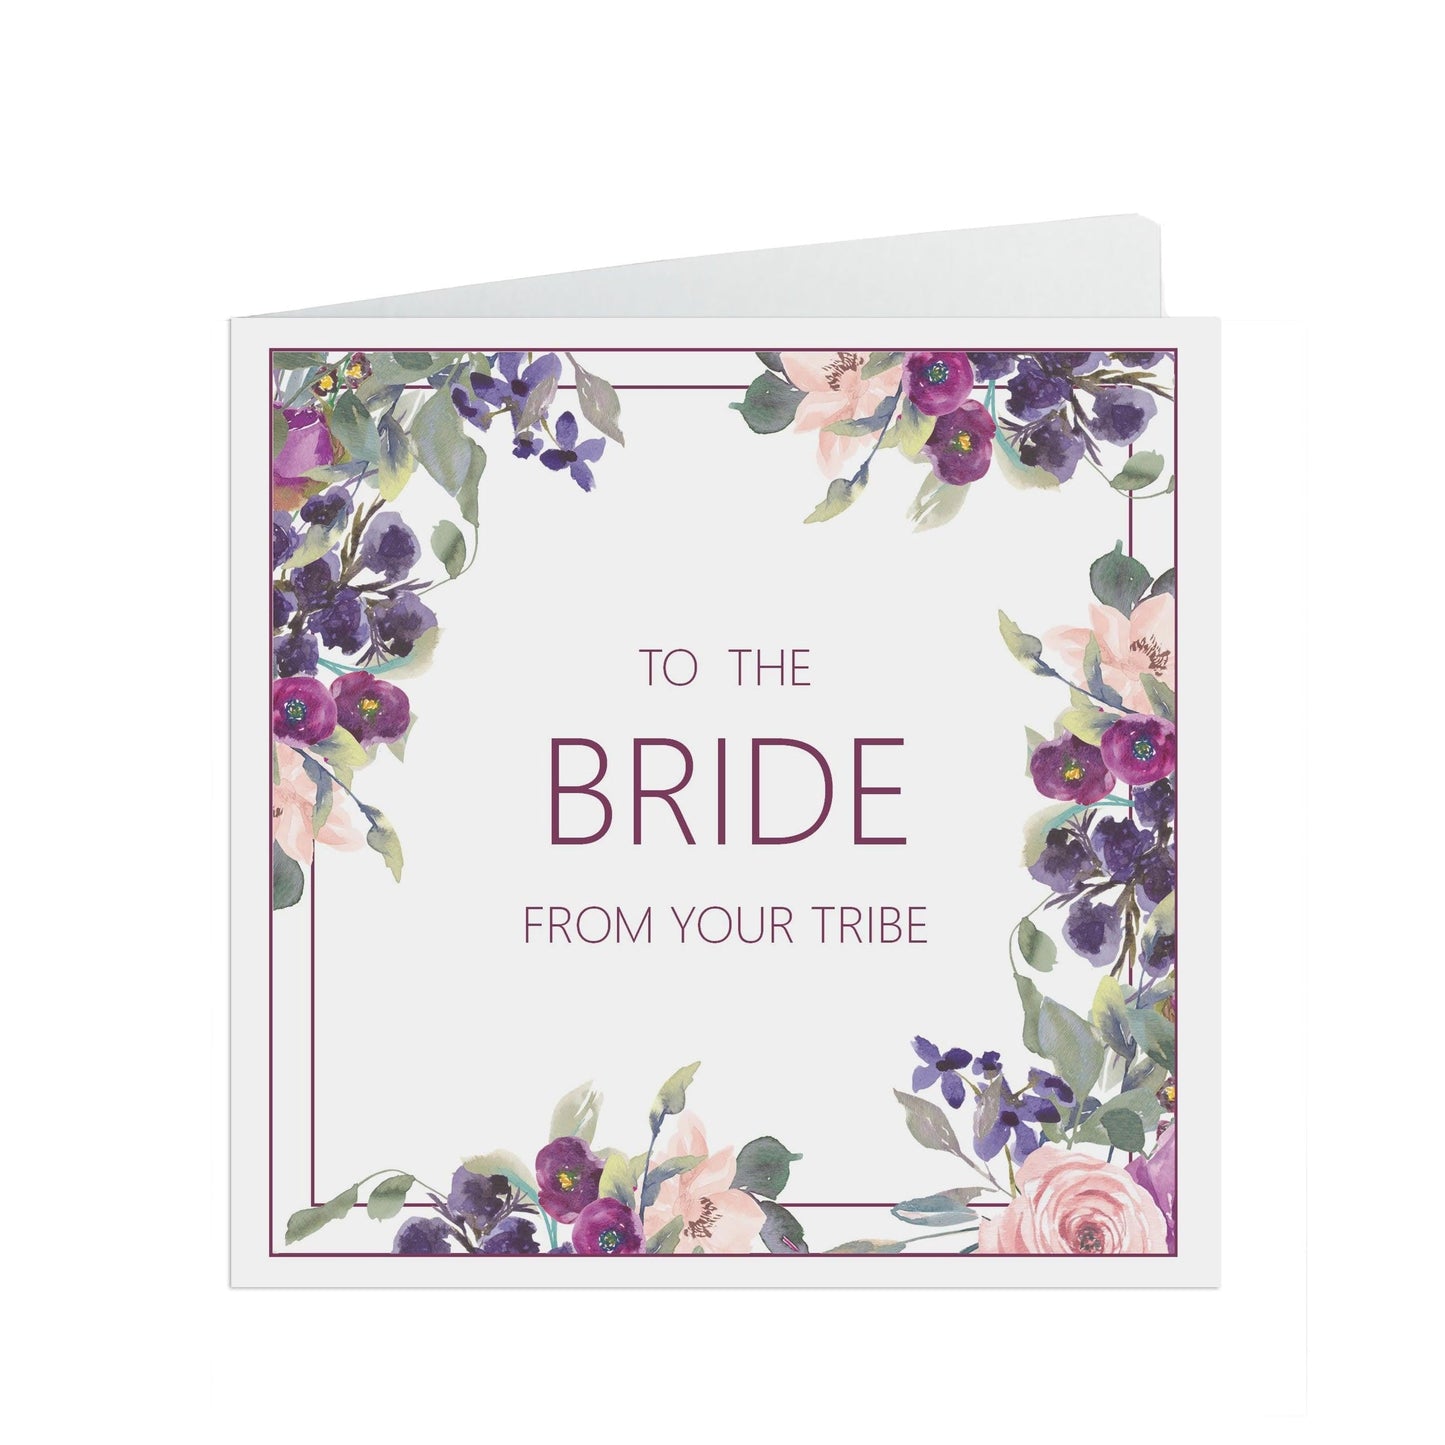  Bride From Your Bride Tribe Wedding Day Card, Purple Floral 6x6 Inches With A Kraft Envelope by PMPRINTED 